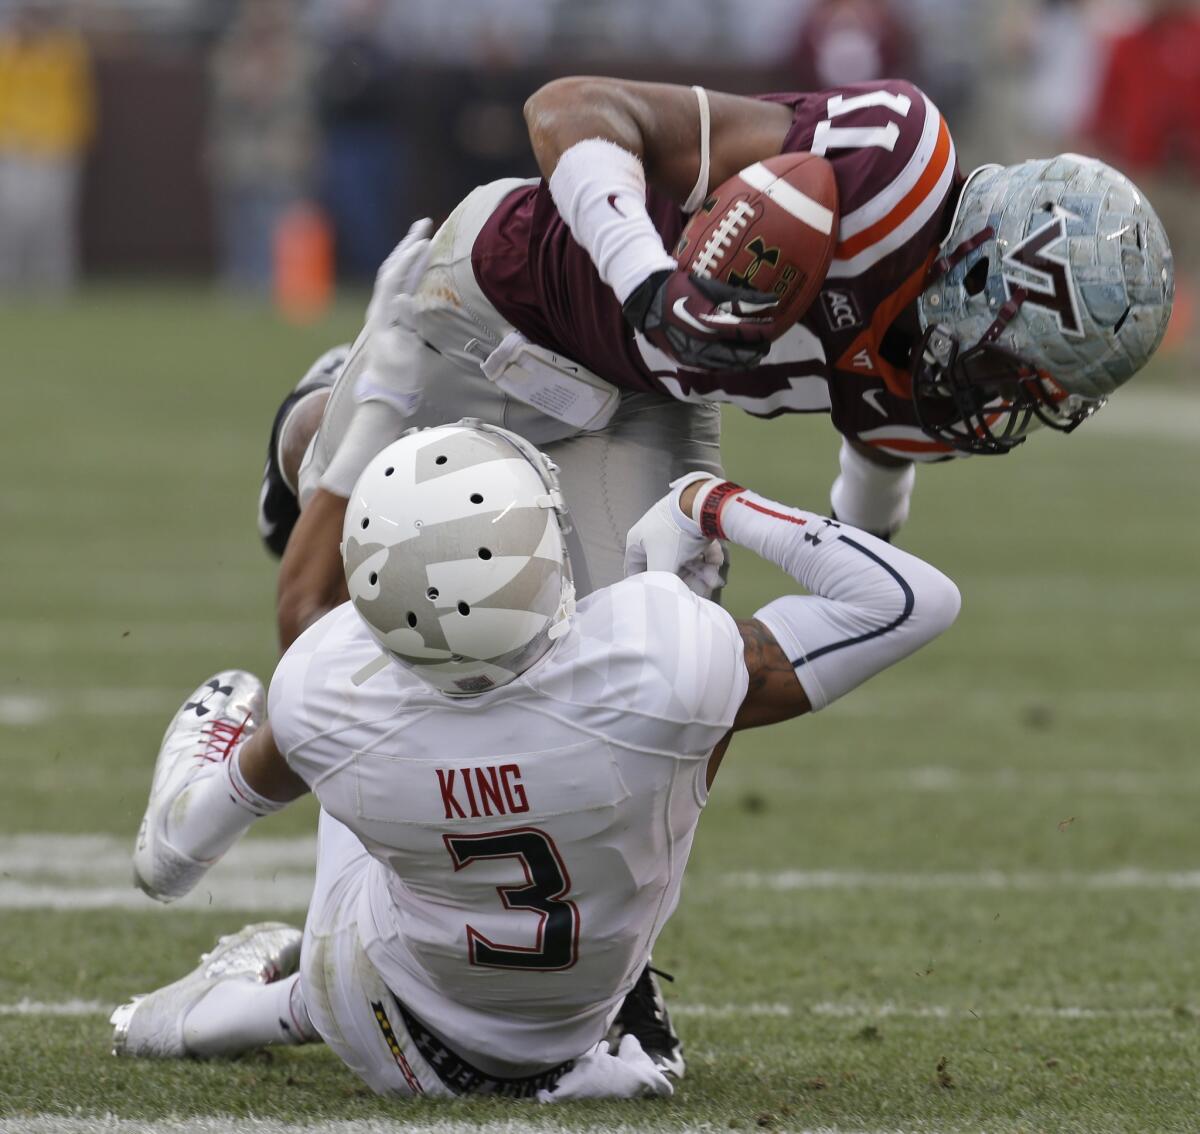 The cornerback position goes three days deep, which means there will be decent options like Virginia Tech’s Kendall Fuller (pictured) and Southeast Louisiana’s Harlan Miller available on day two, and talents like LSU’s Rashard Robinson and FIU’s Richard Leonard available in the later round. Teams in need of cornerback help won’t have to rush to take one.